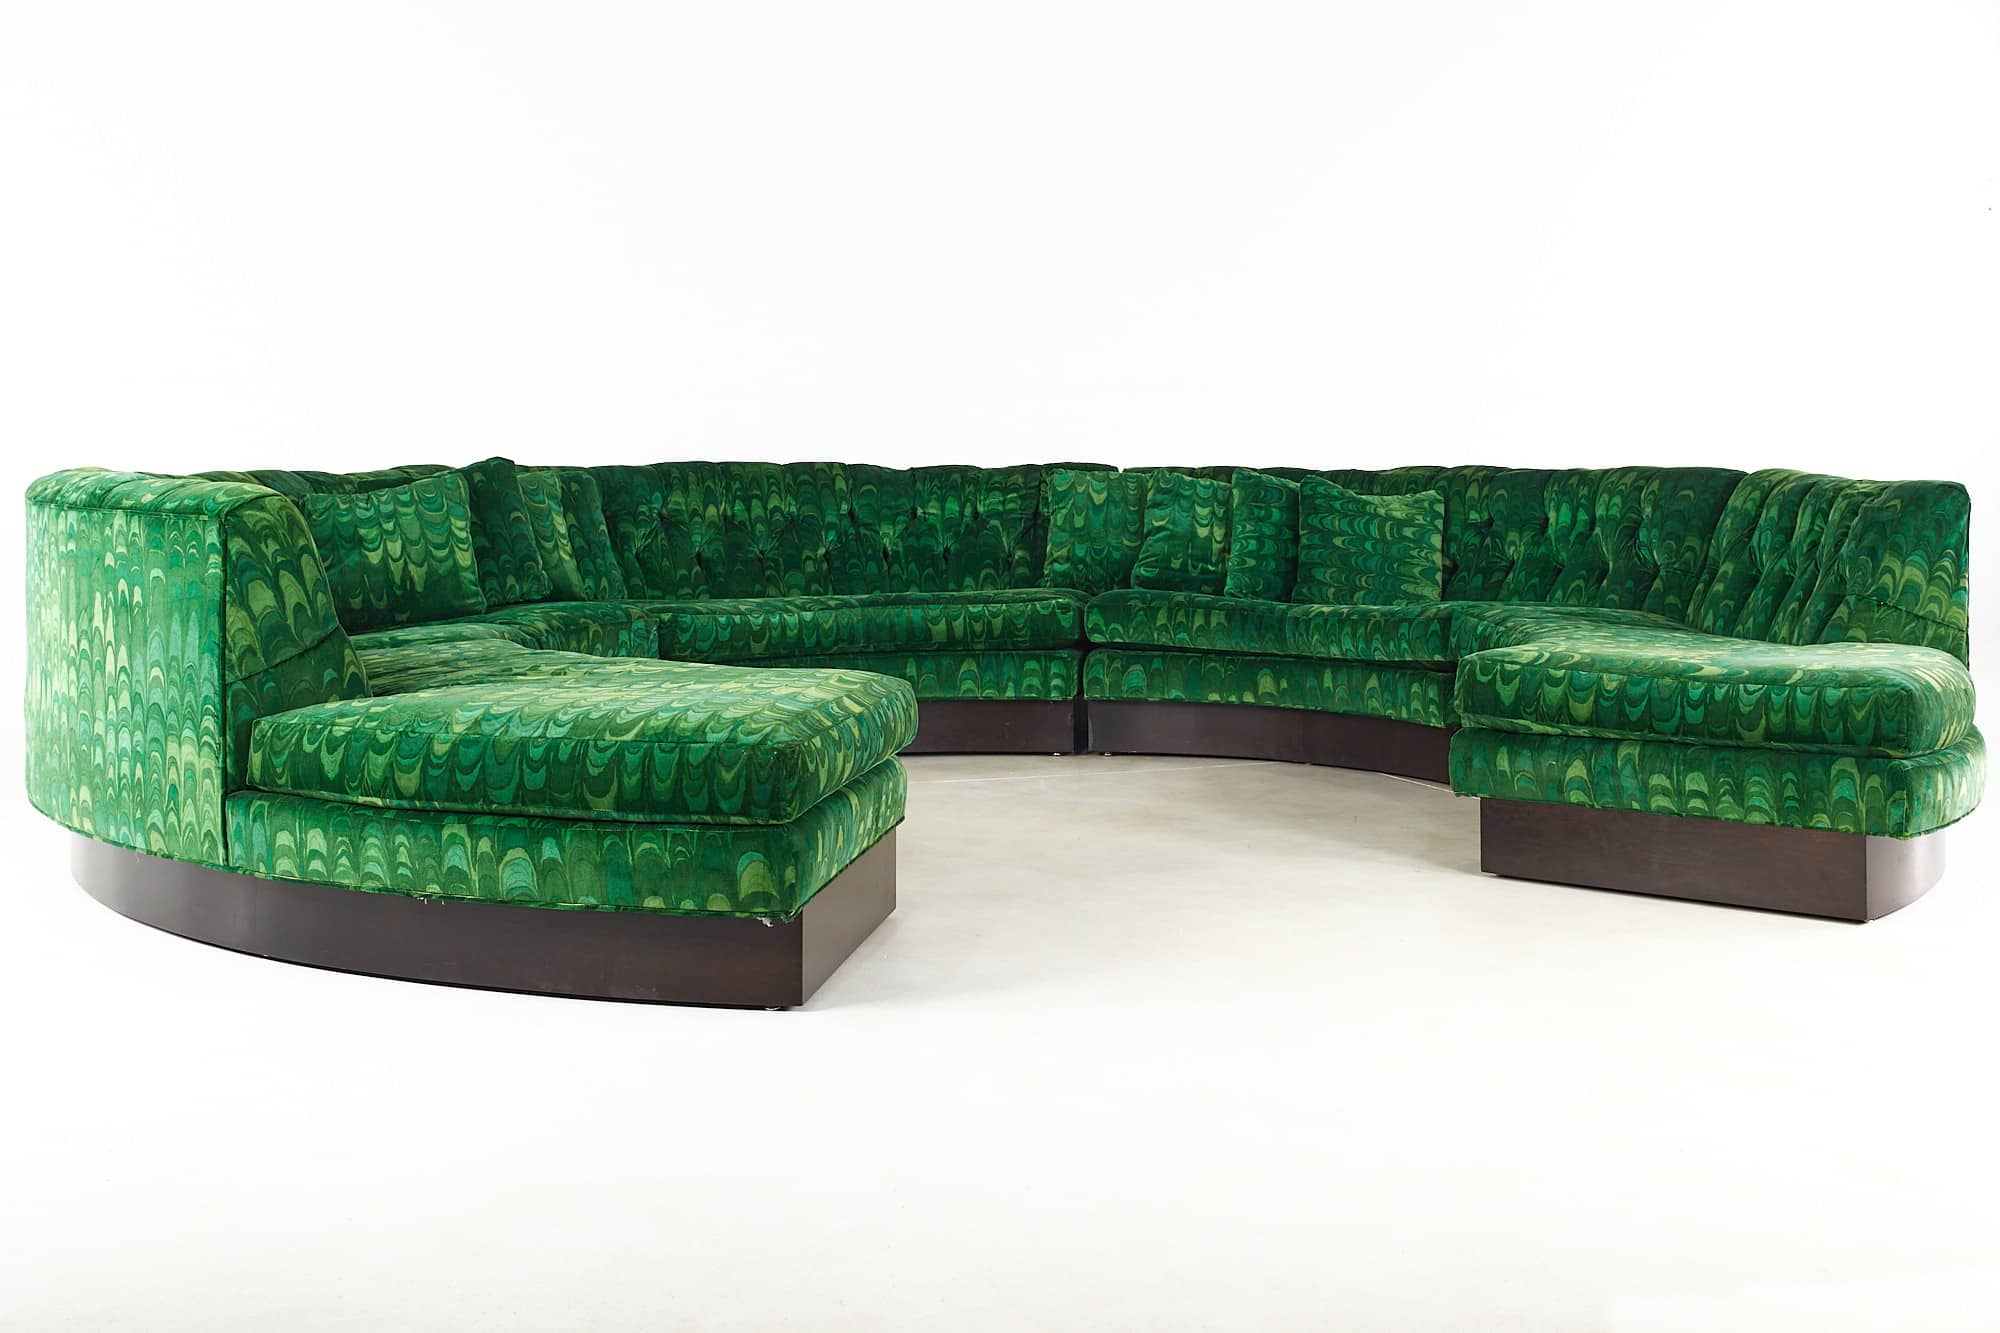 Milo Baughman for Thayer Coggin with Jack Lenor Larsen Upholstery Mid Century Pit Sectional Sofa